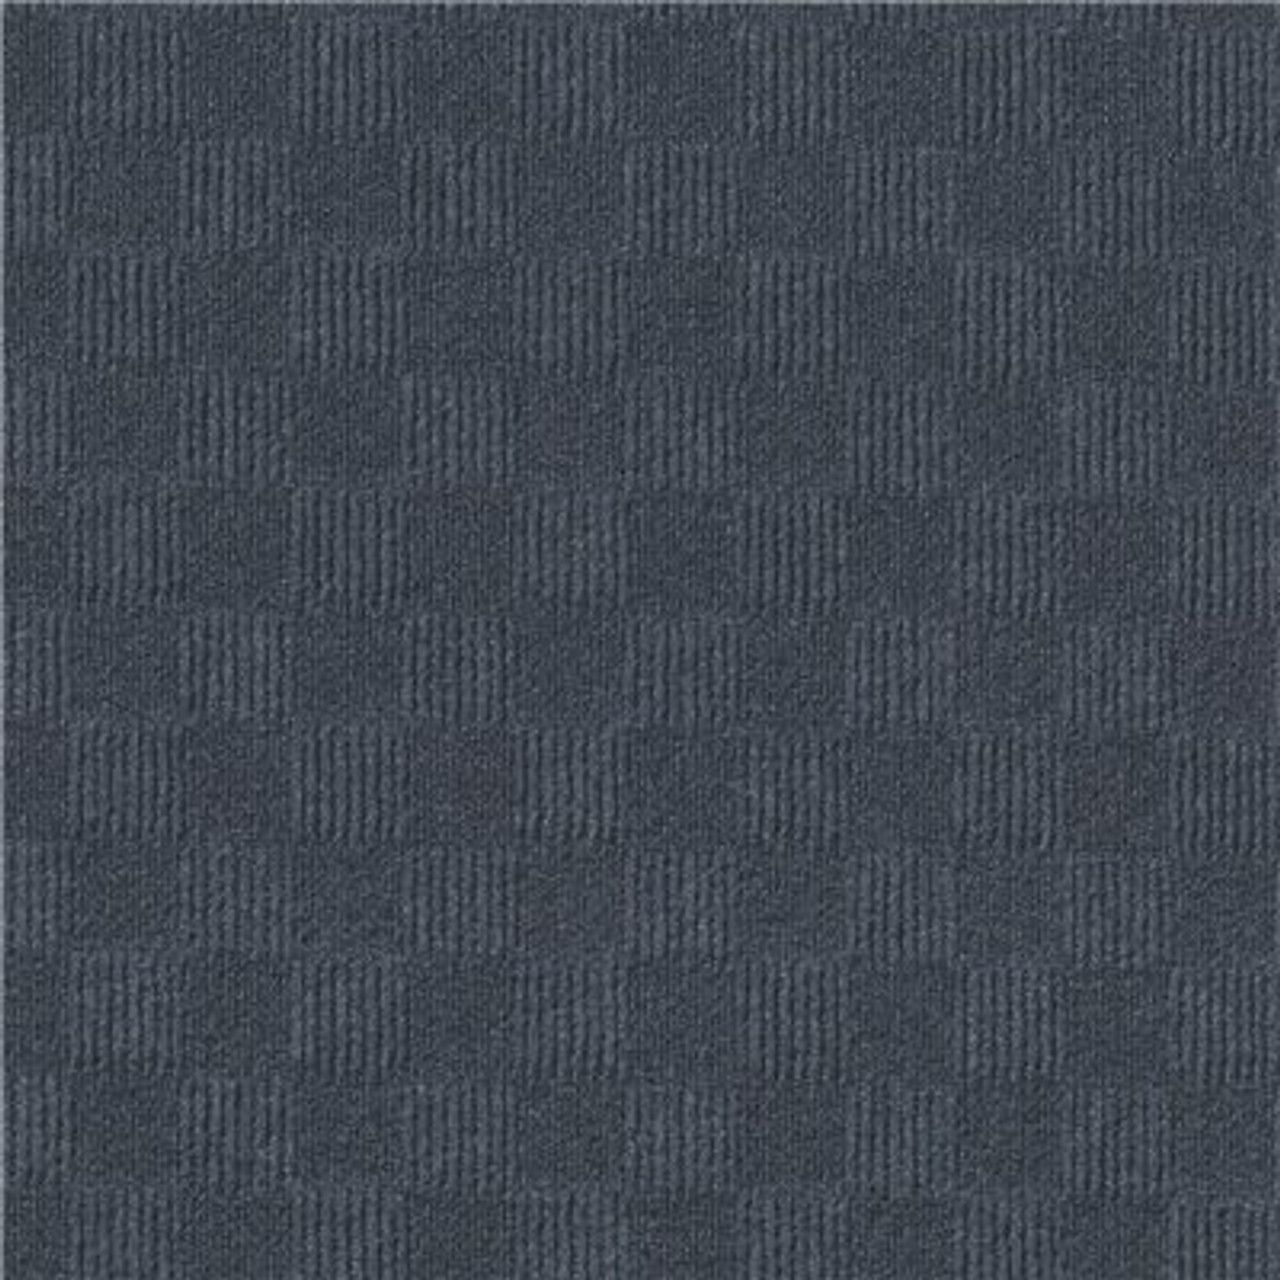 Foss First Impressions City Block Denim 24 In. X 24 In. Commercial Peel And Stick Carpet Tile (15-Tile / Case)